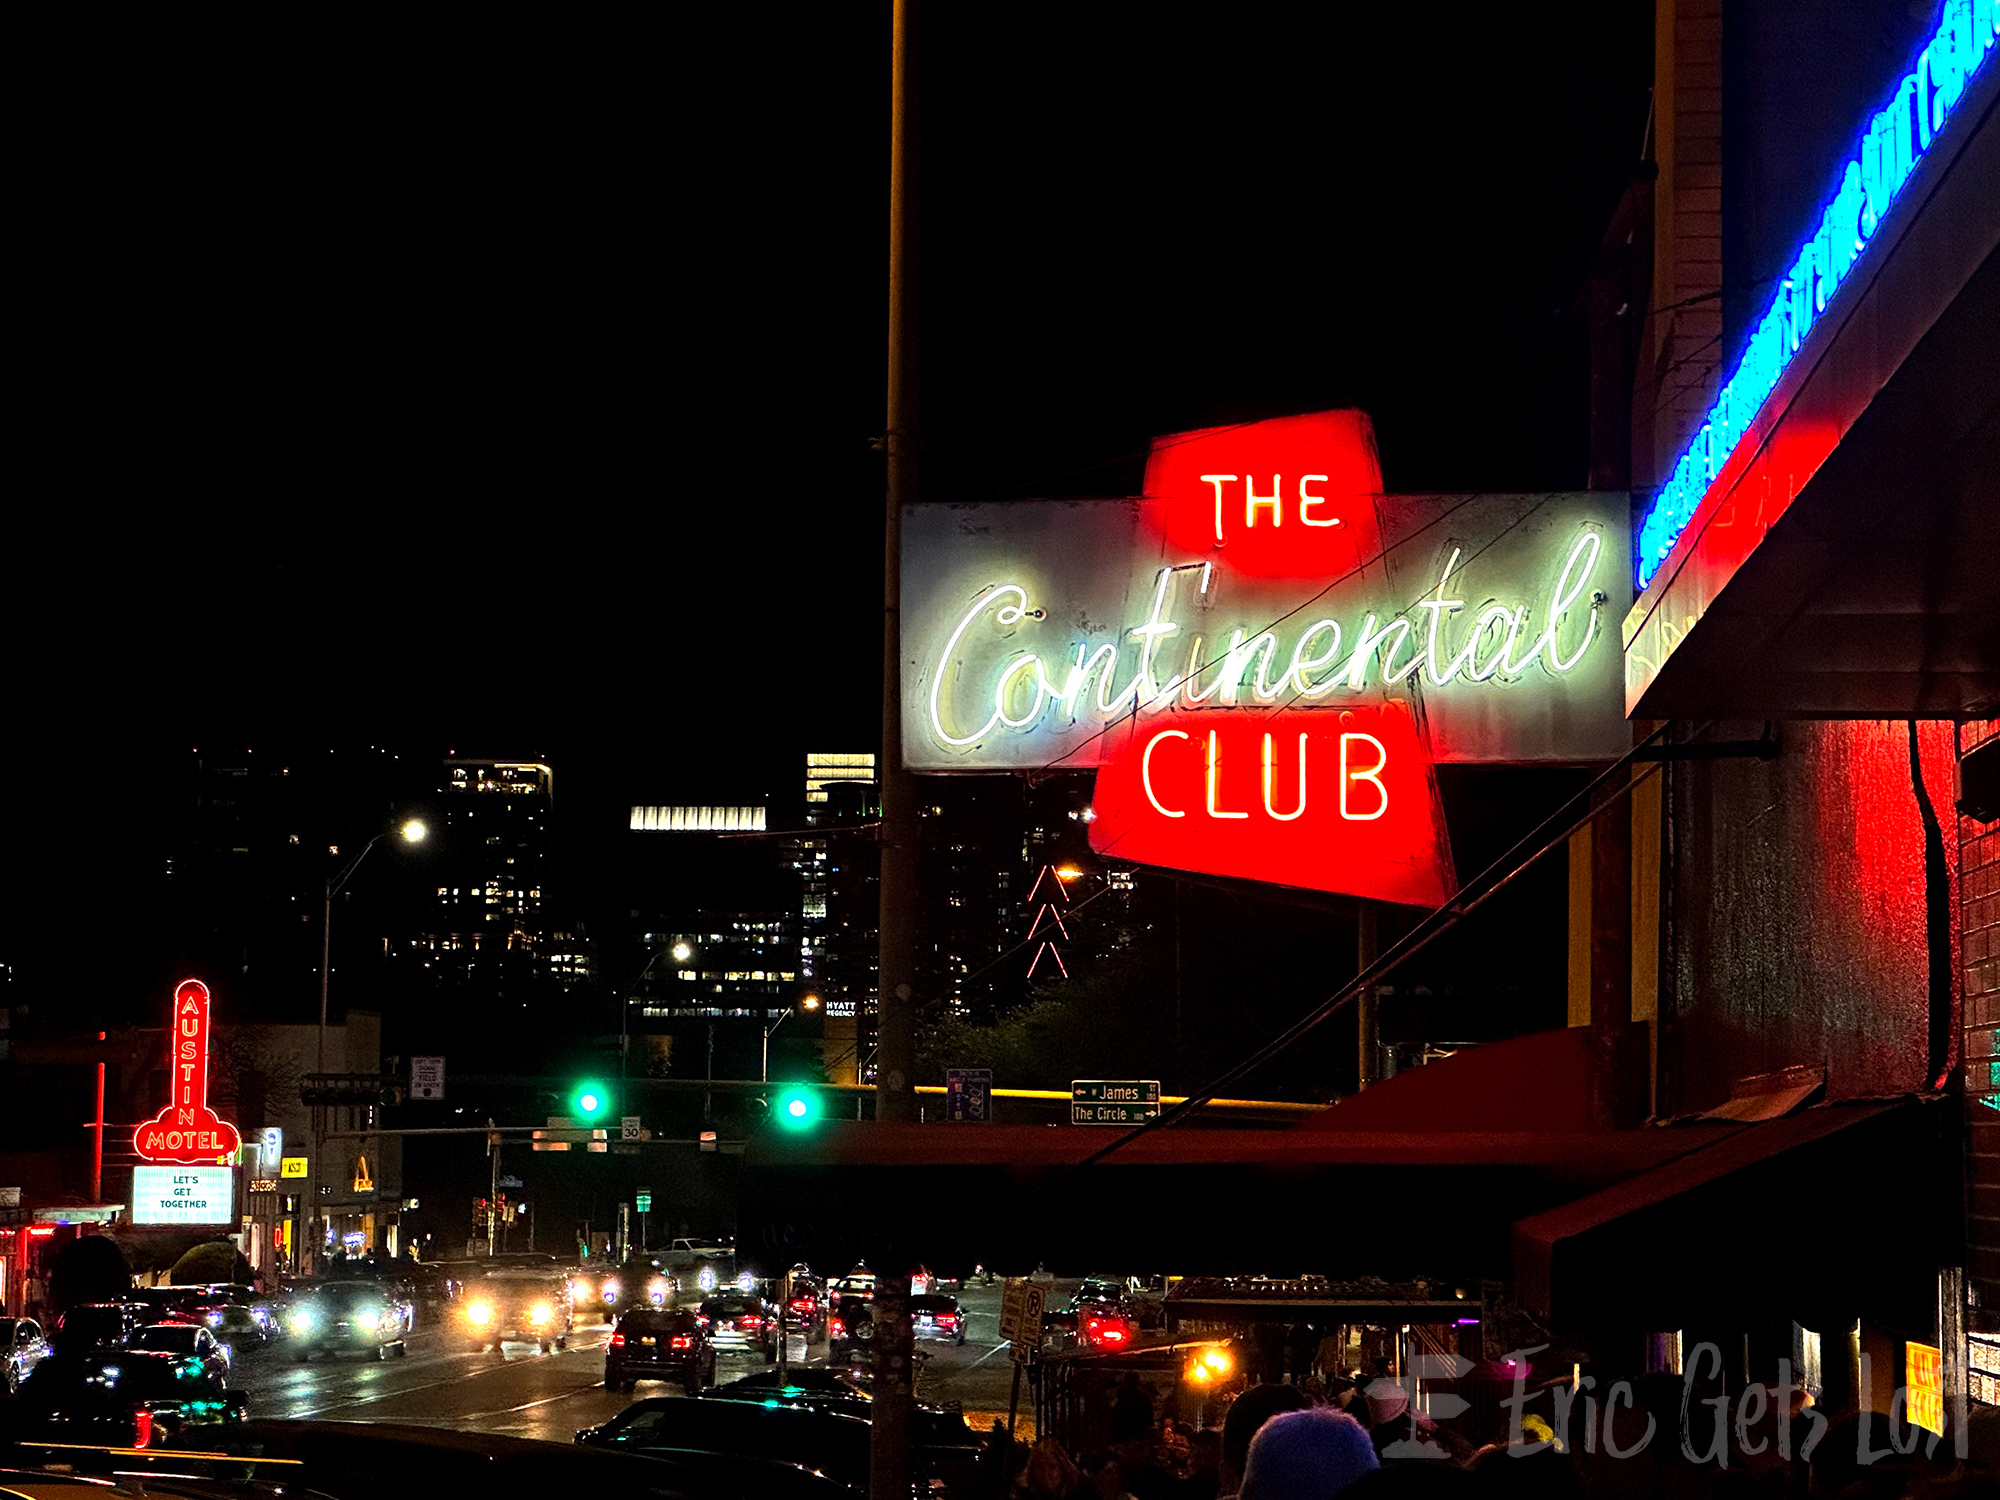 The Continental Club